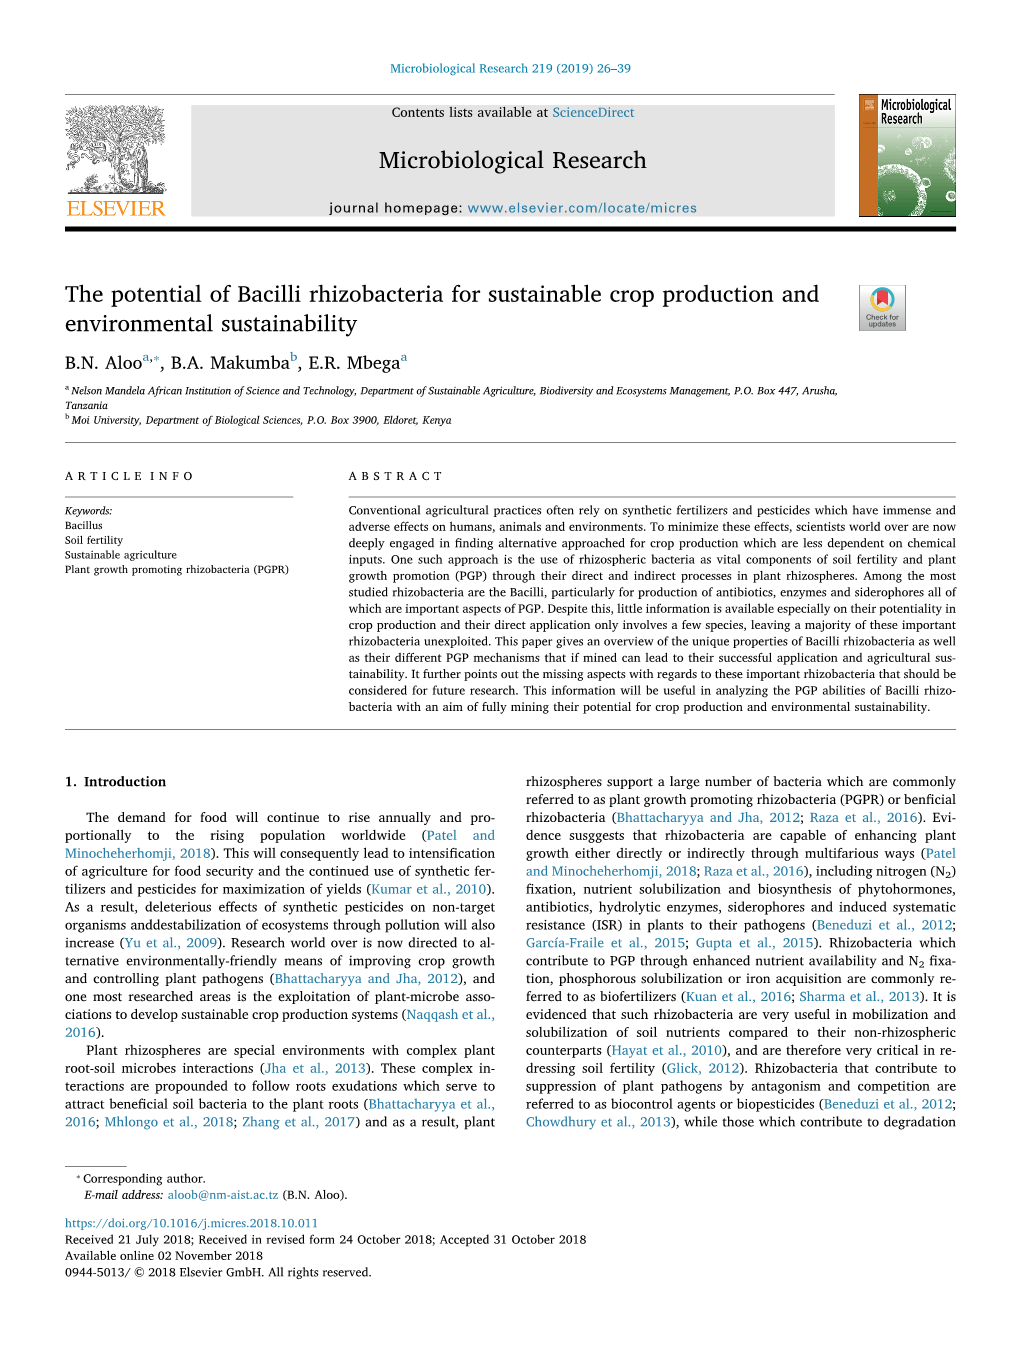 The Potential of Bacilli Rhizobacteria for Sustainable Crop Production and Environmental Sustainability T ⁎ B.N